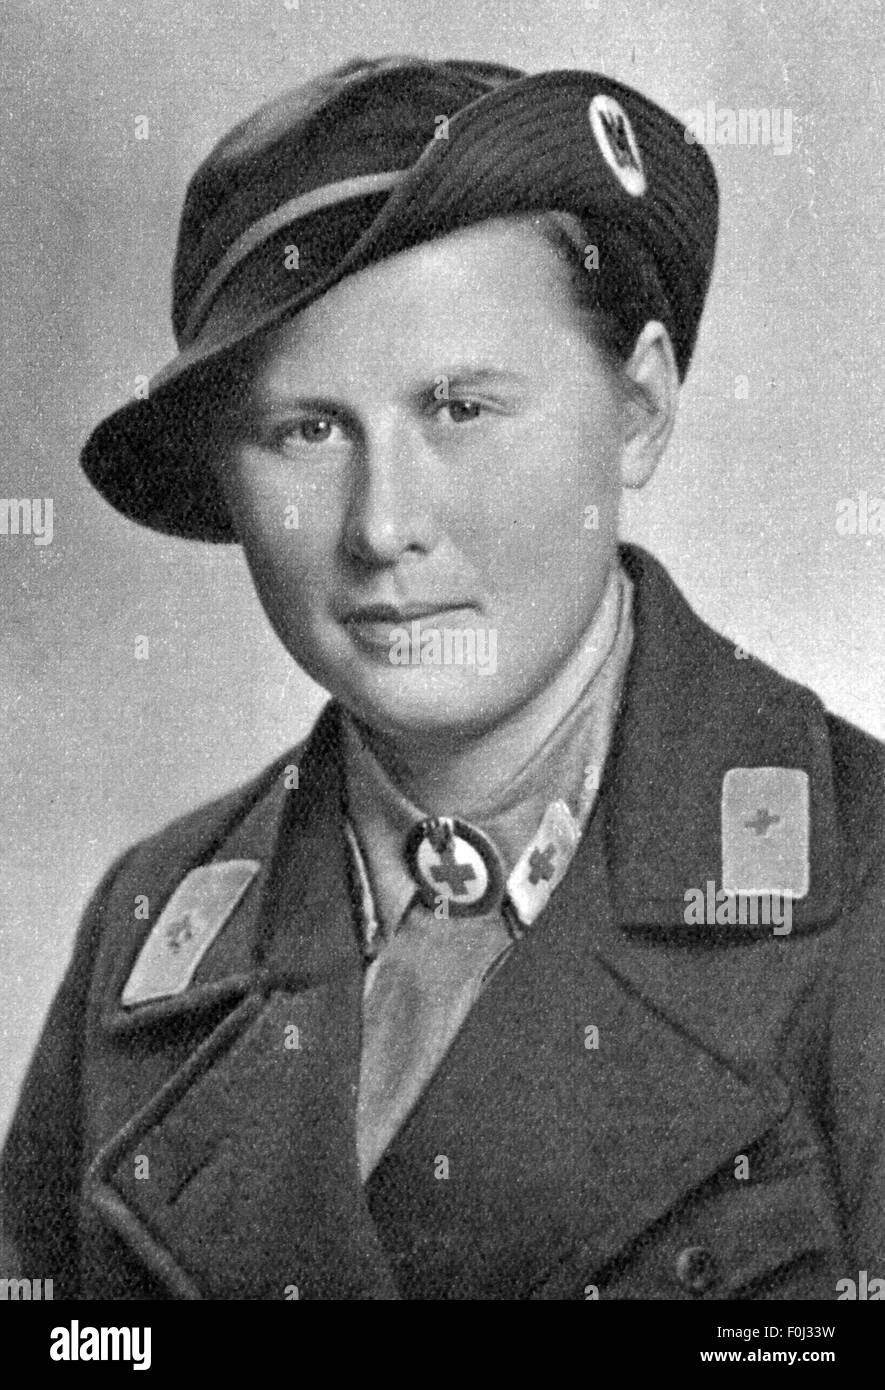 Second World War / WWII, medical corps organisation / medical service, nurse of the German red cross in war uniform, October 1939, Additional-Rights-Clearences-Not Available Stock Photo